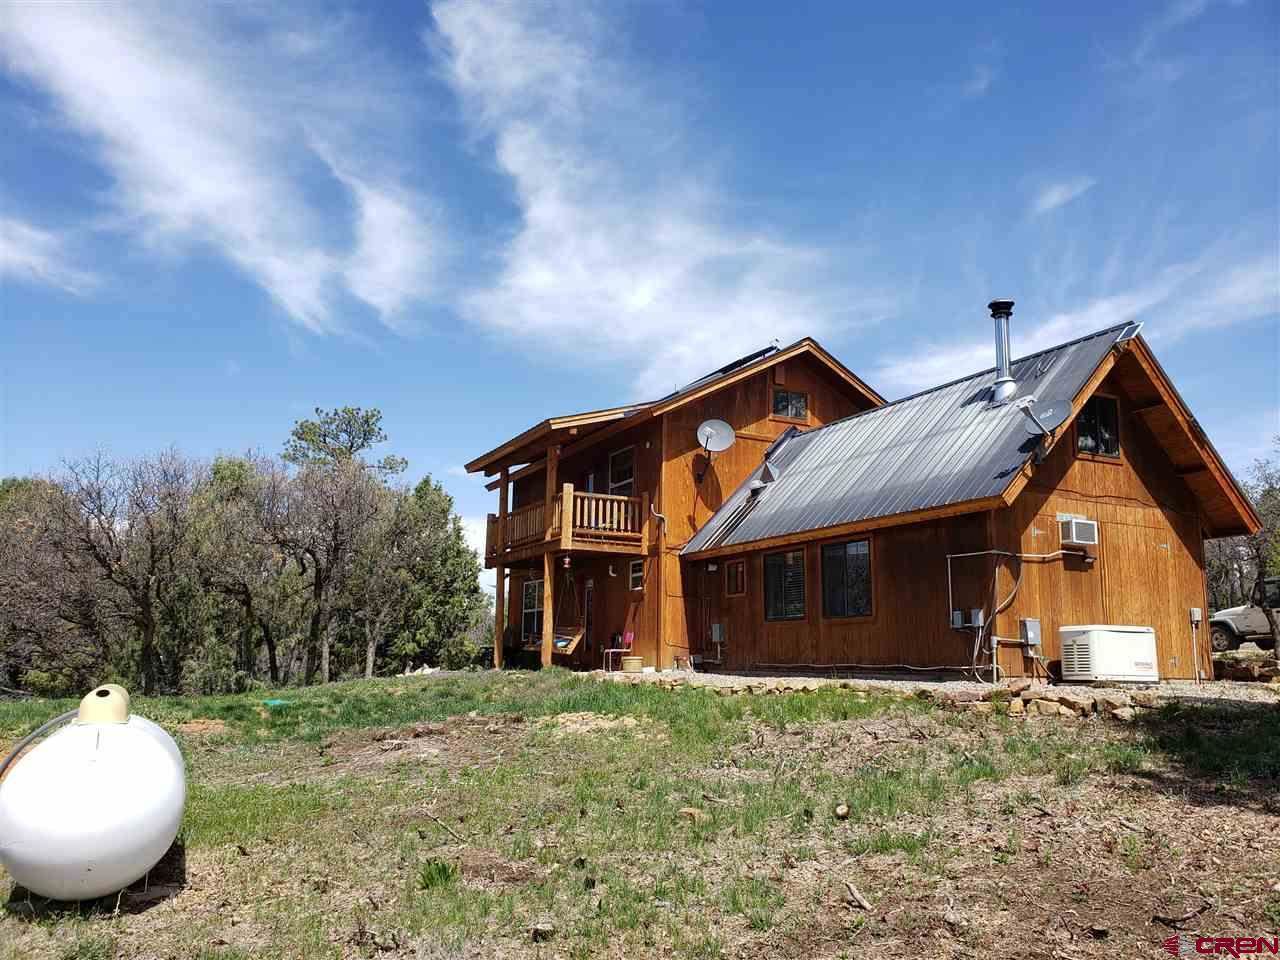 64 Jakes Court, Pagosa Springs, CO 81147